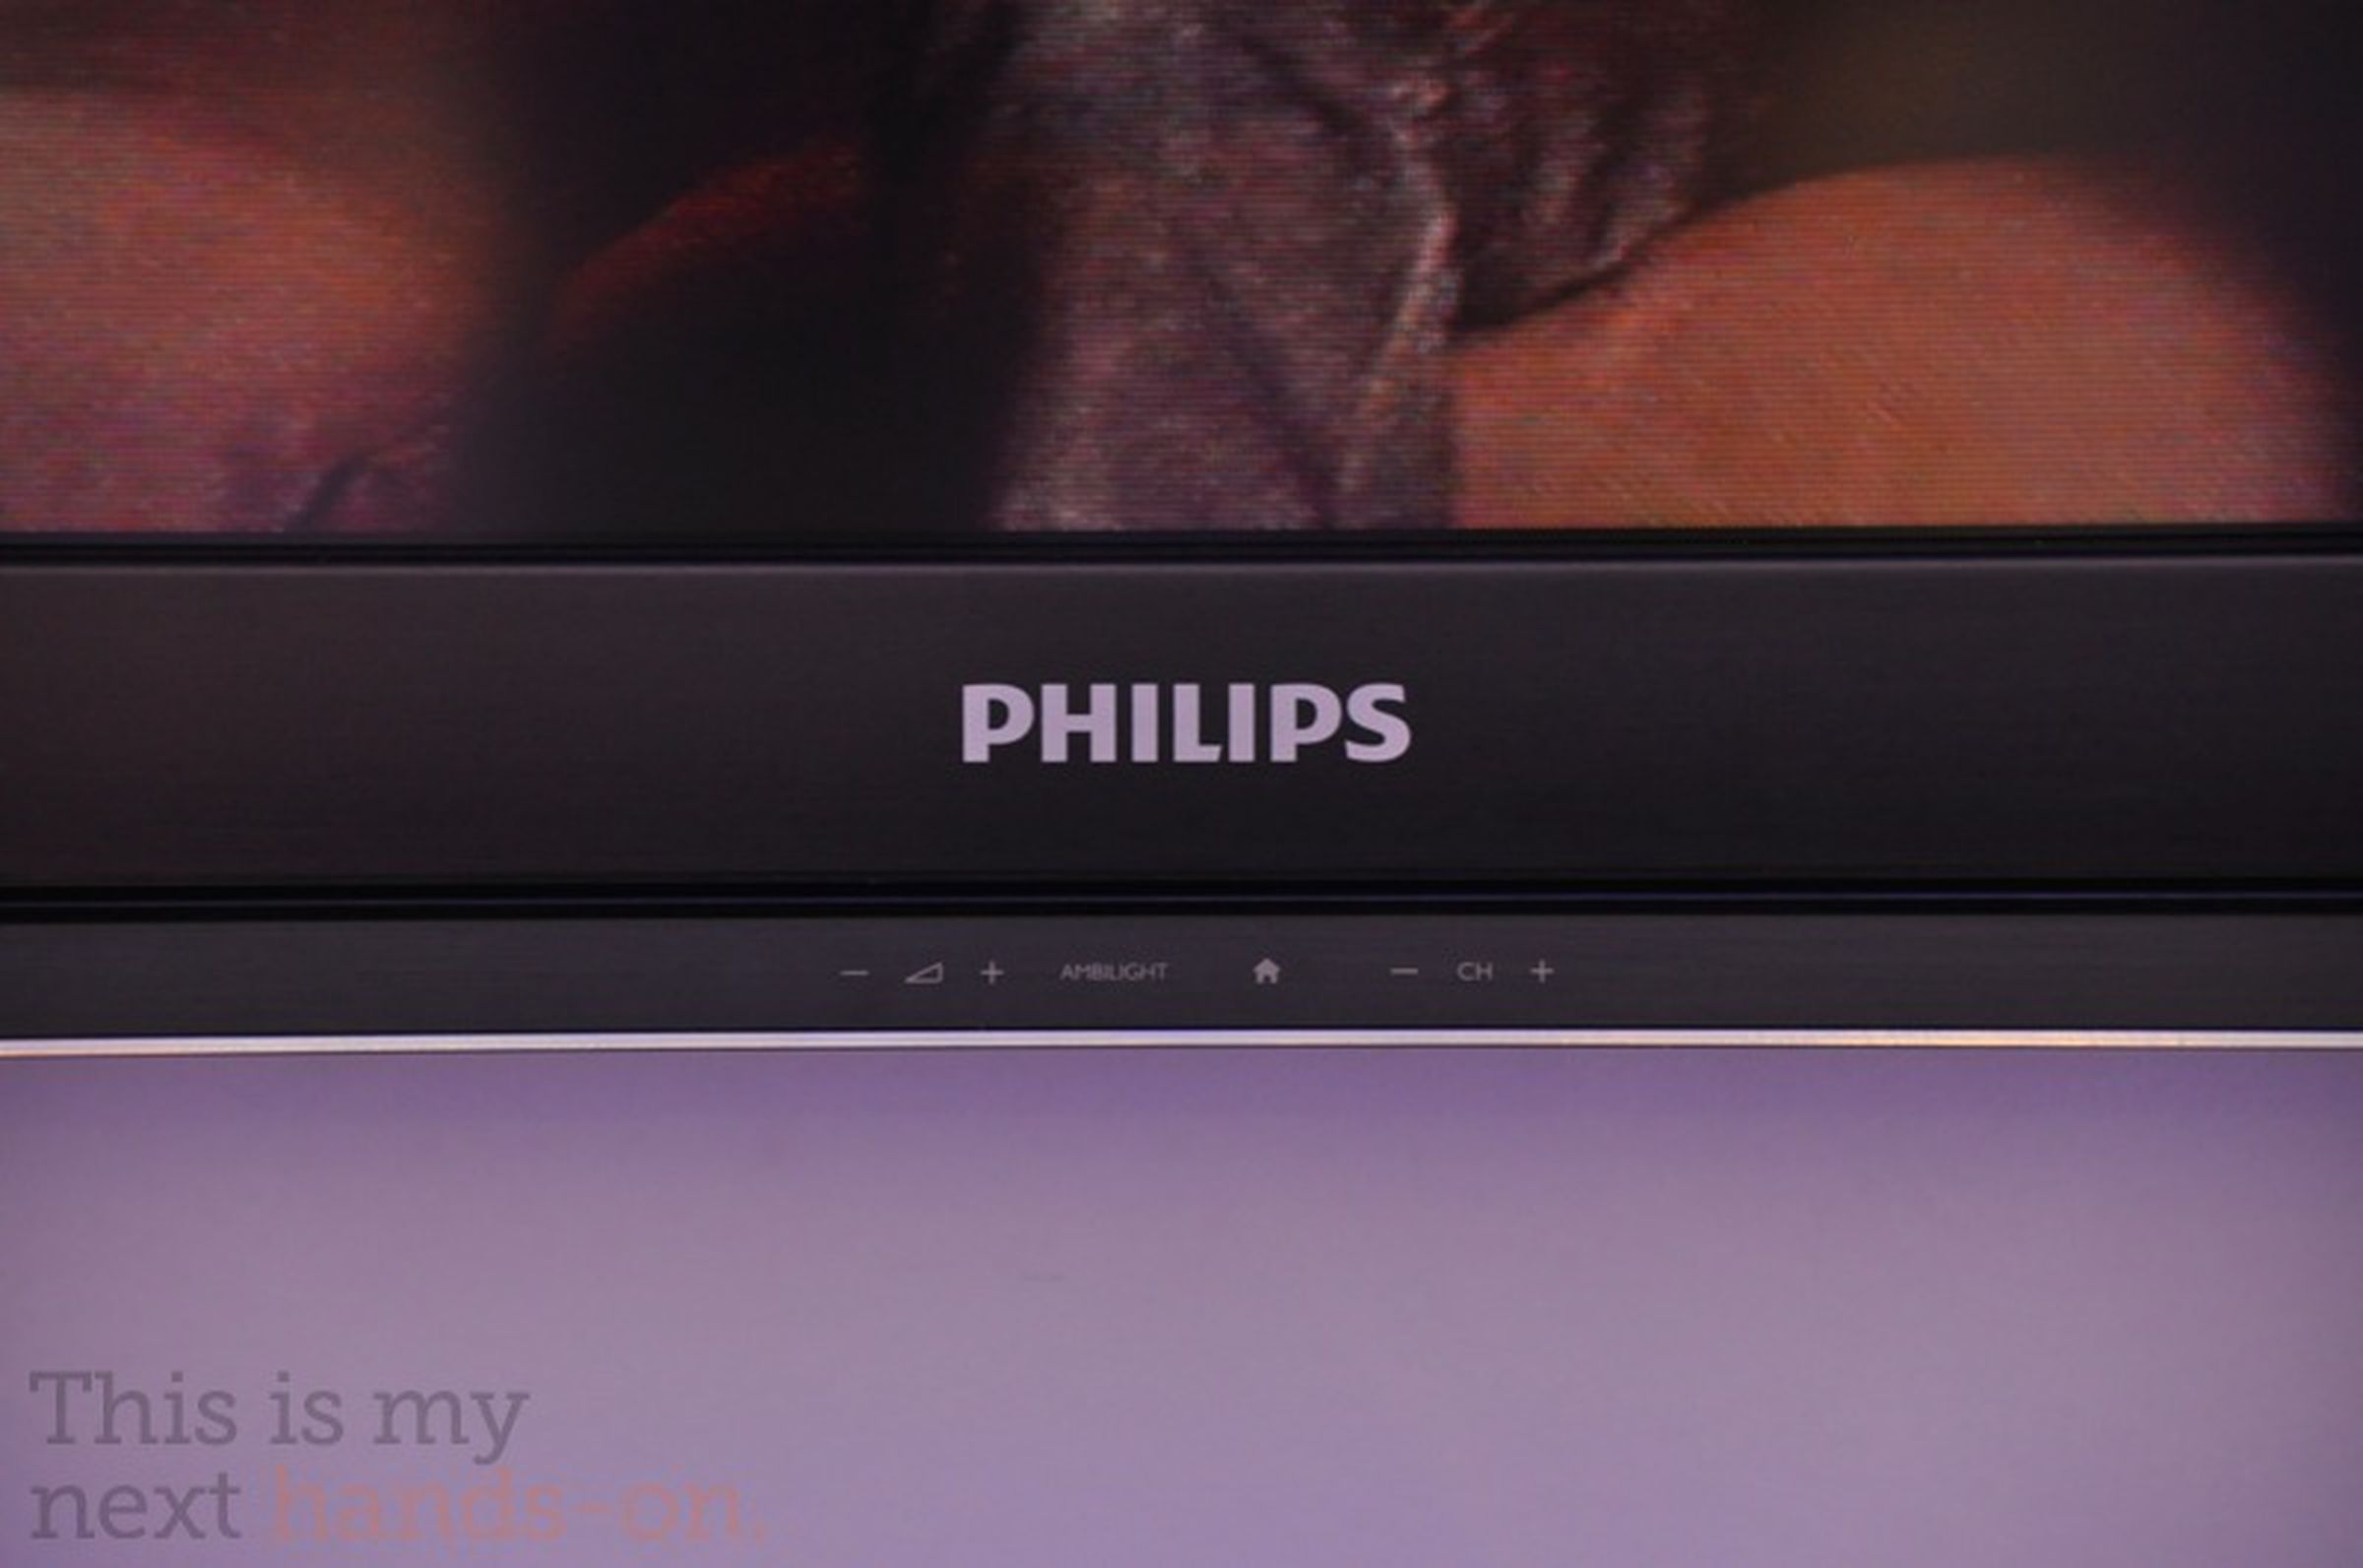 Philips Cinema 21:9 Platinum TV release date, price, and preview pictures